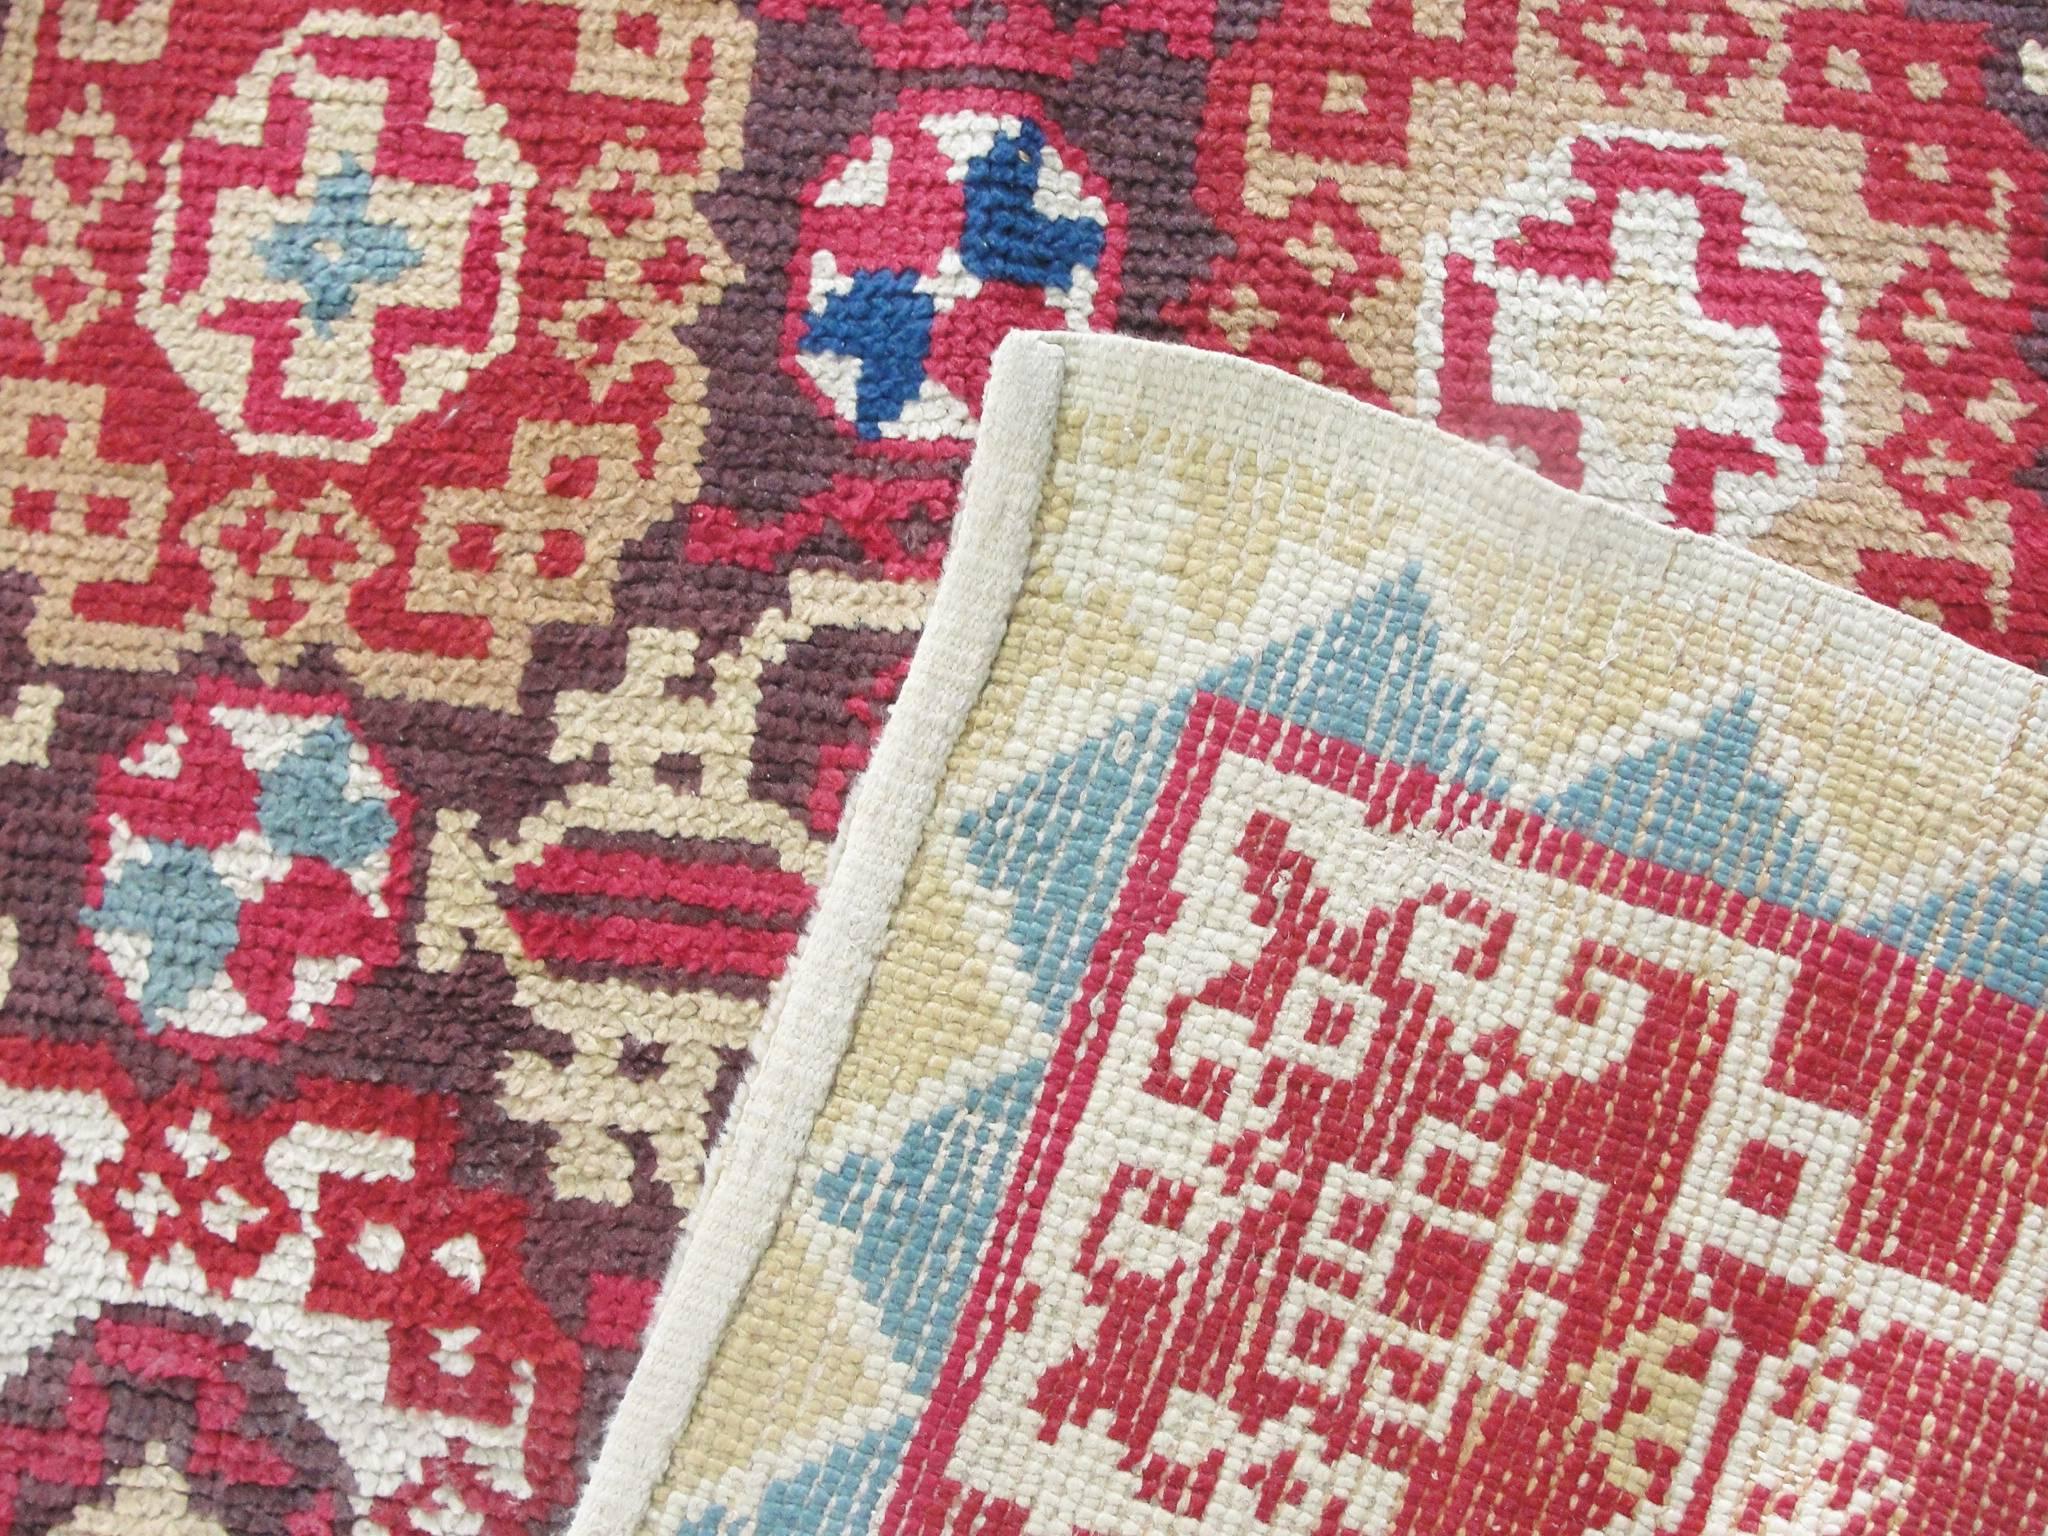 Main centers for production of English rugs were located in Axminster, Wilton and Kidderminster. Distinctive patterns on these antique rugs include deep golden coloration and asymmetrical designs.

This stunning English carpet stands in a long